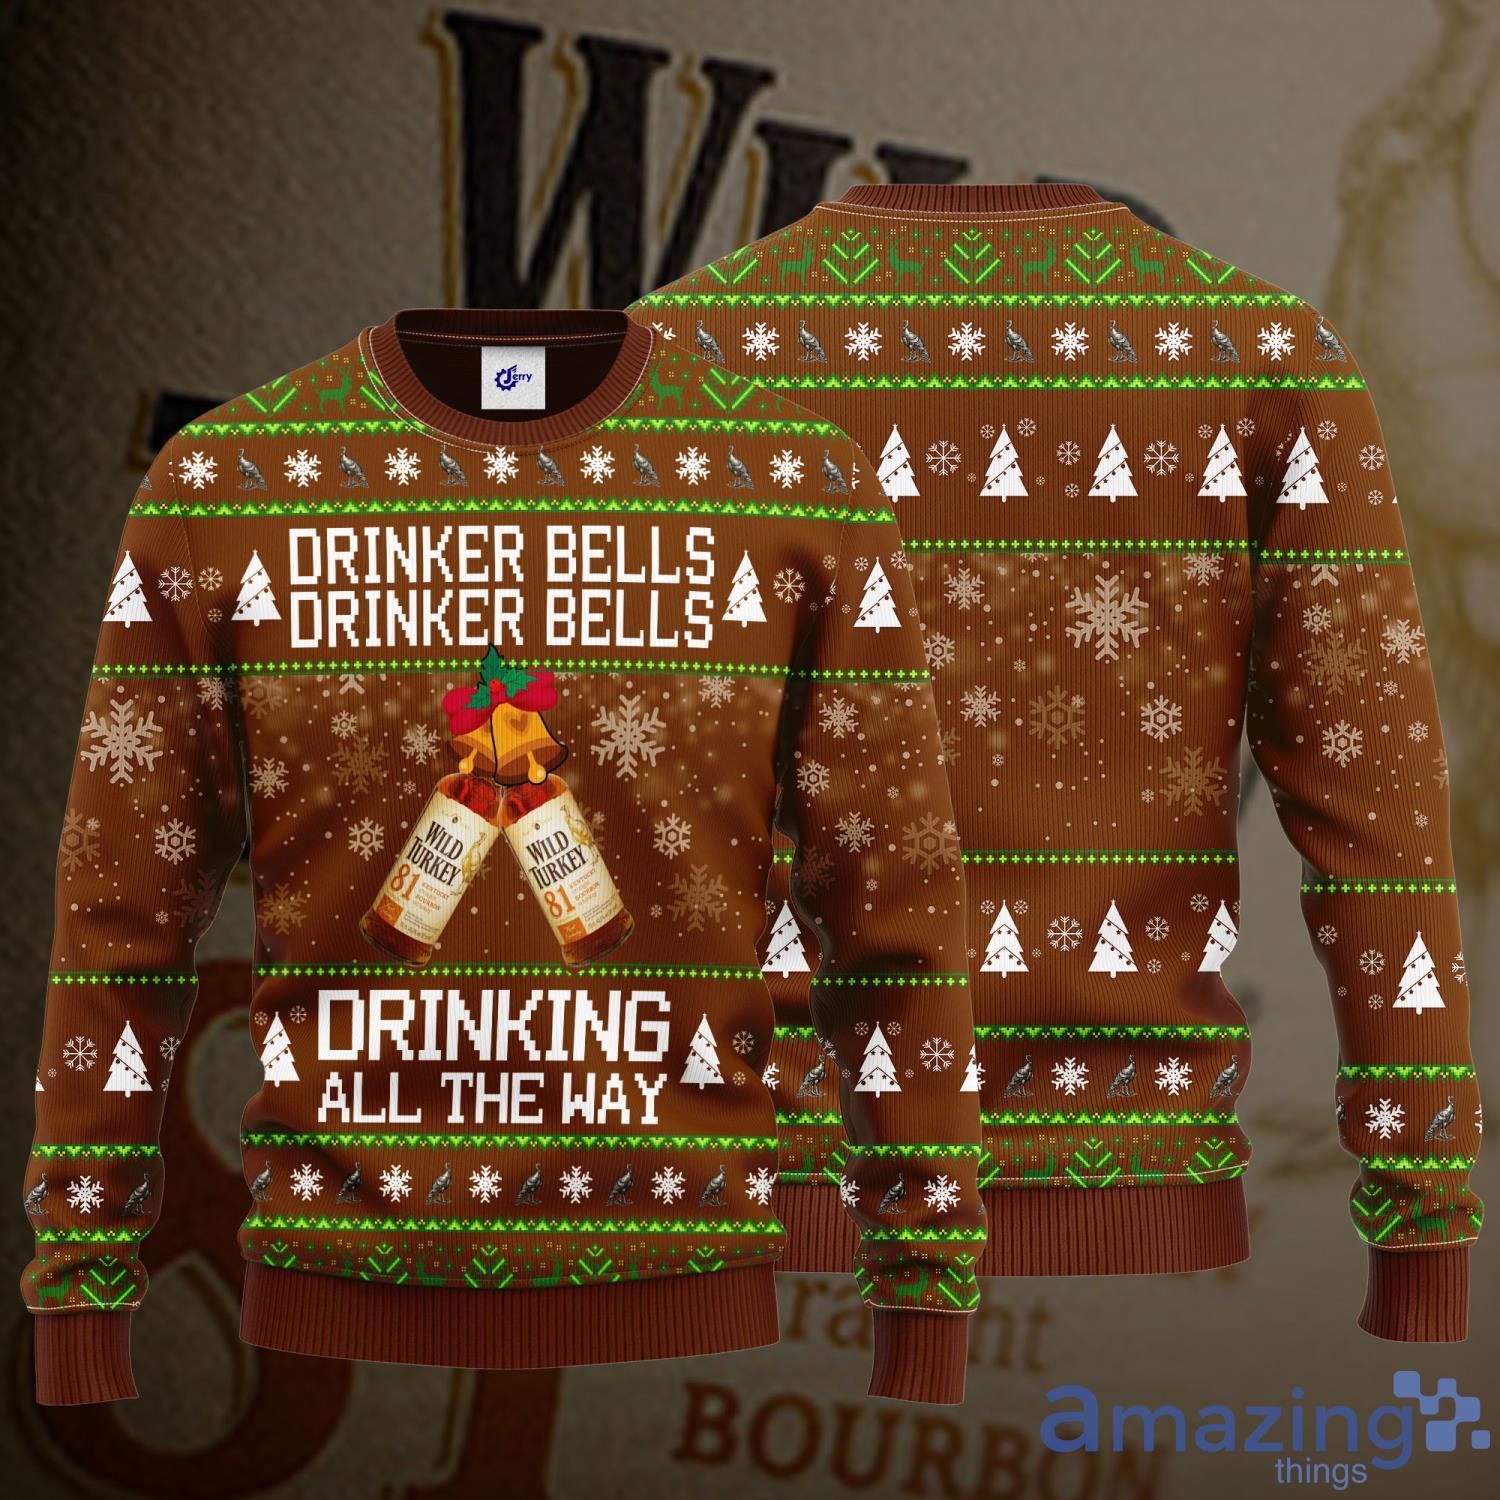 Wild Turkey Drinker Bells Drinker Bells Drinking All The Way Ugly Christmas Sweater Product Photo 1